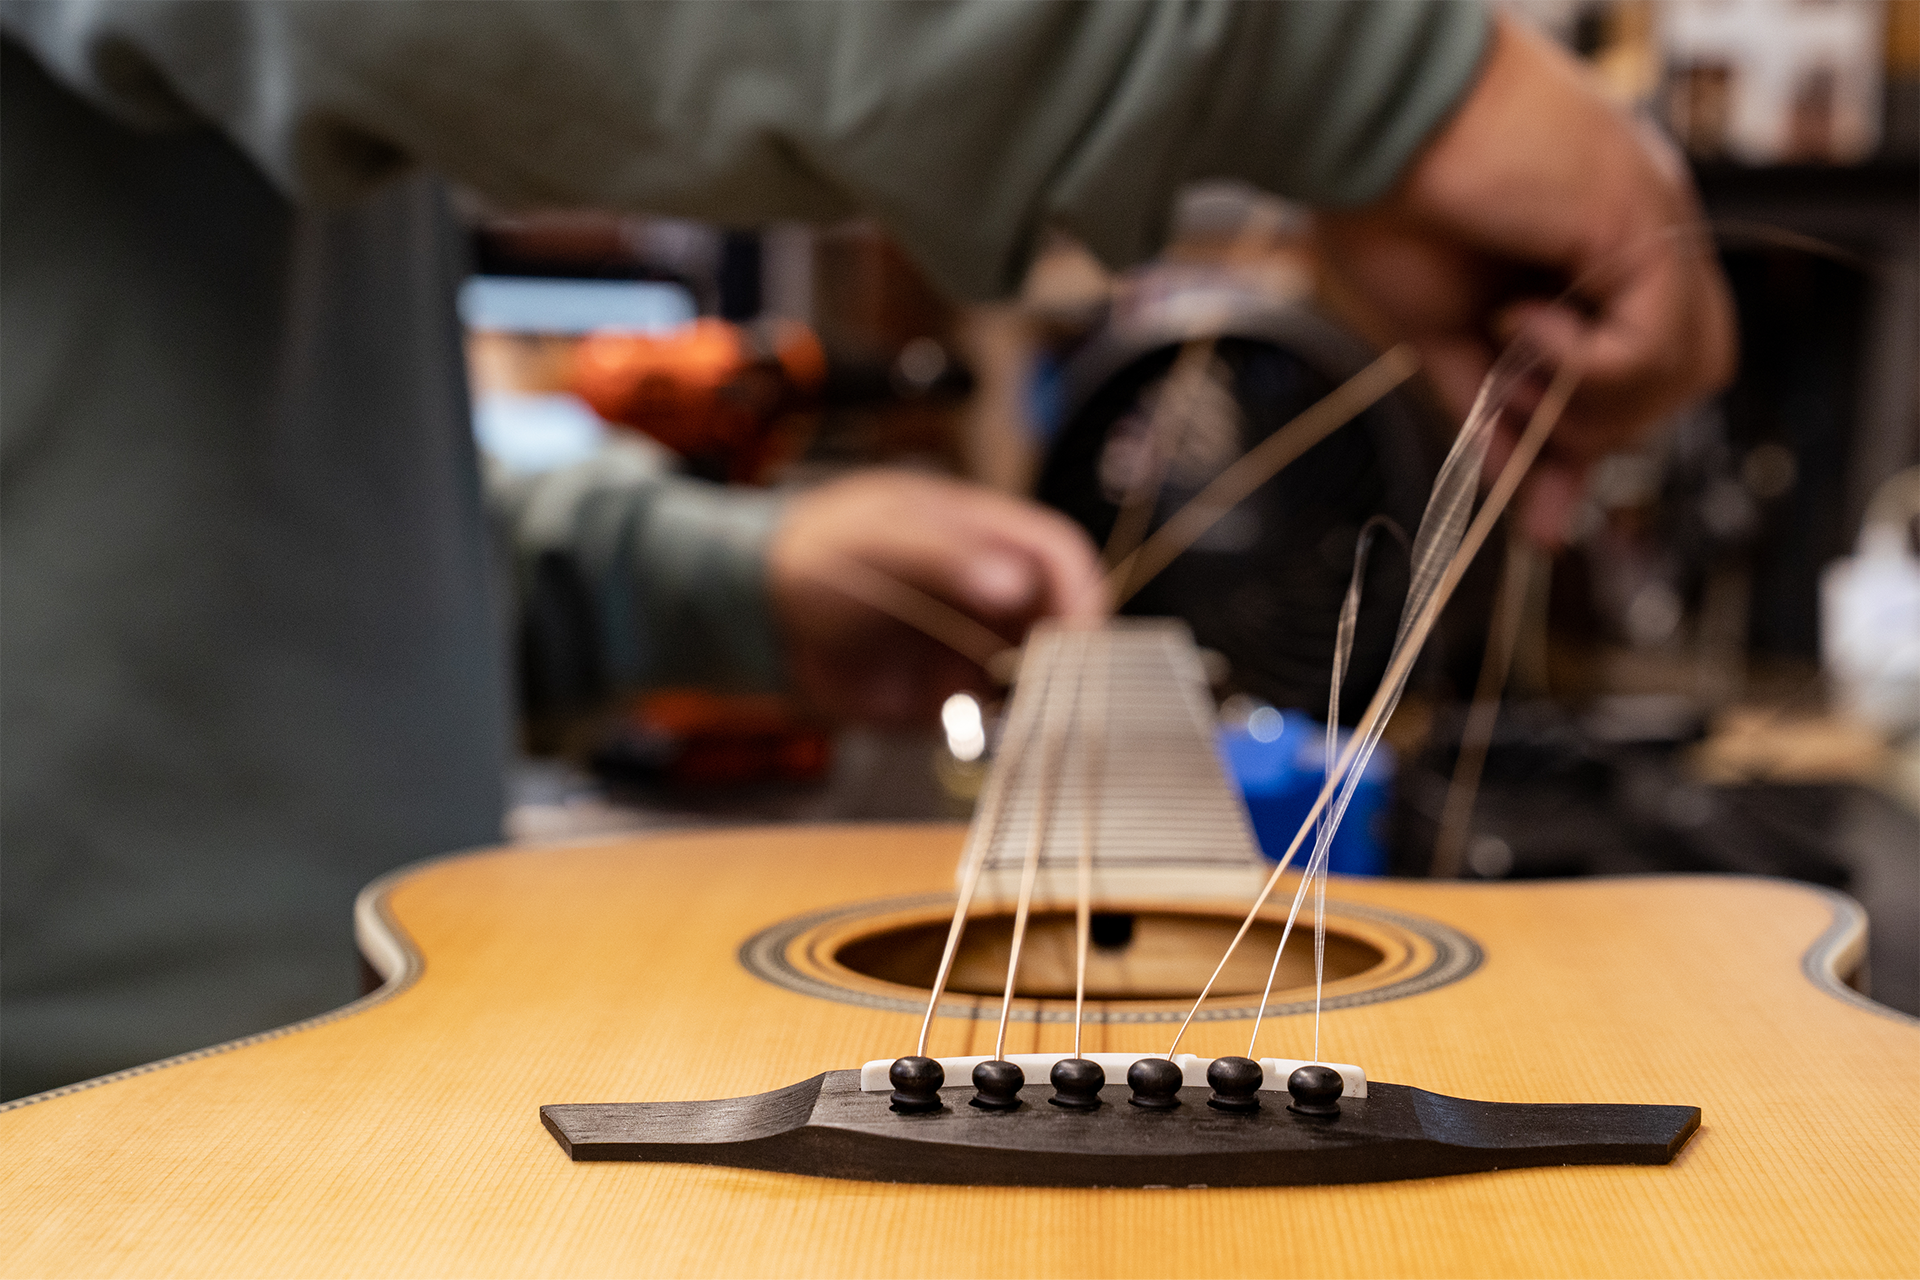 A close-up on the bridge of a guitar in the middle of a restring.